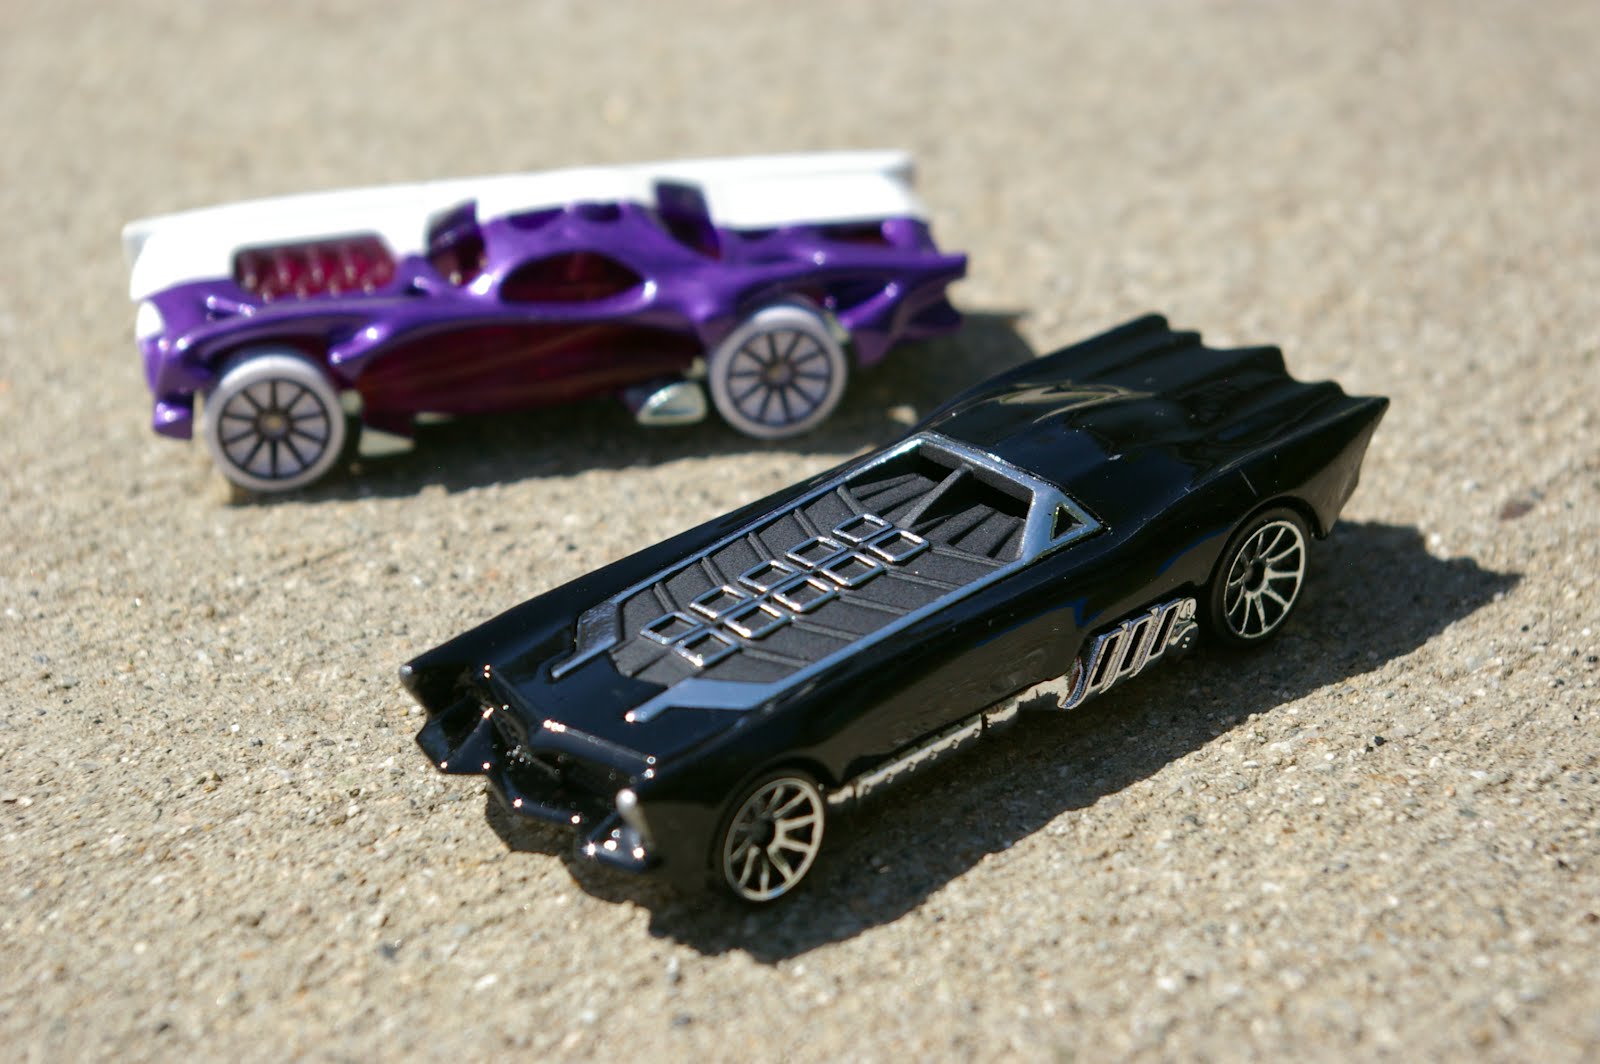 Hey! The Batman and Two-Face cars I designed last year are finally out 